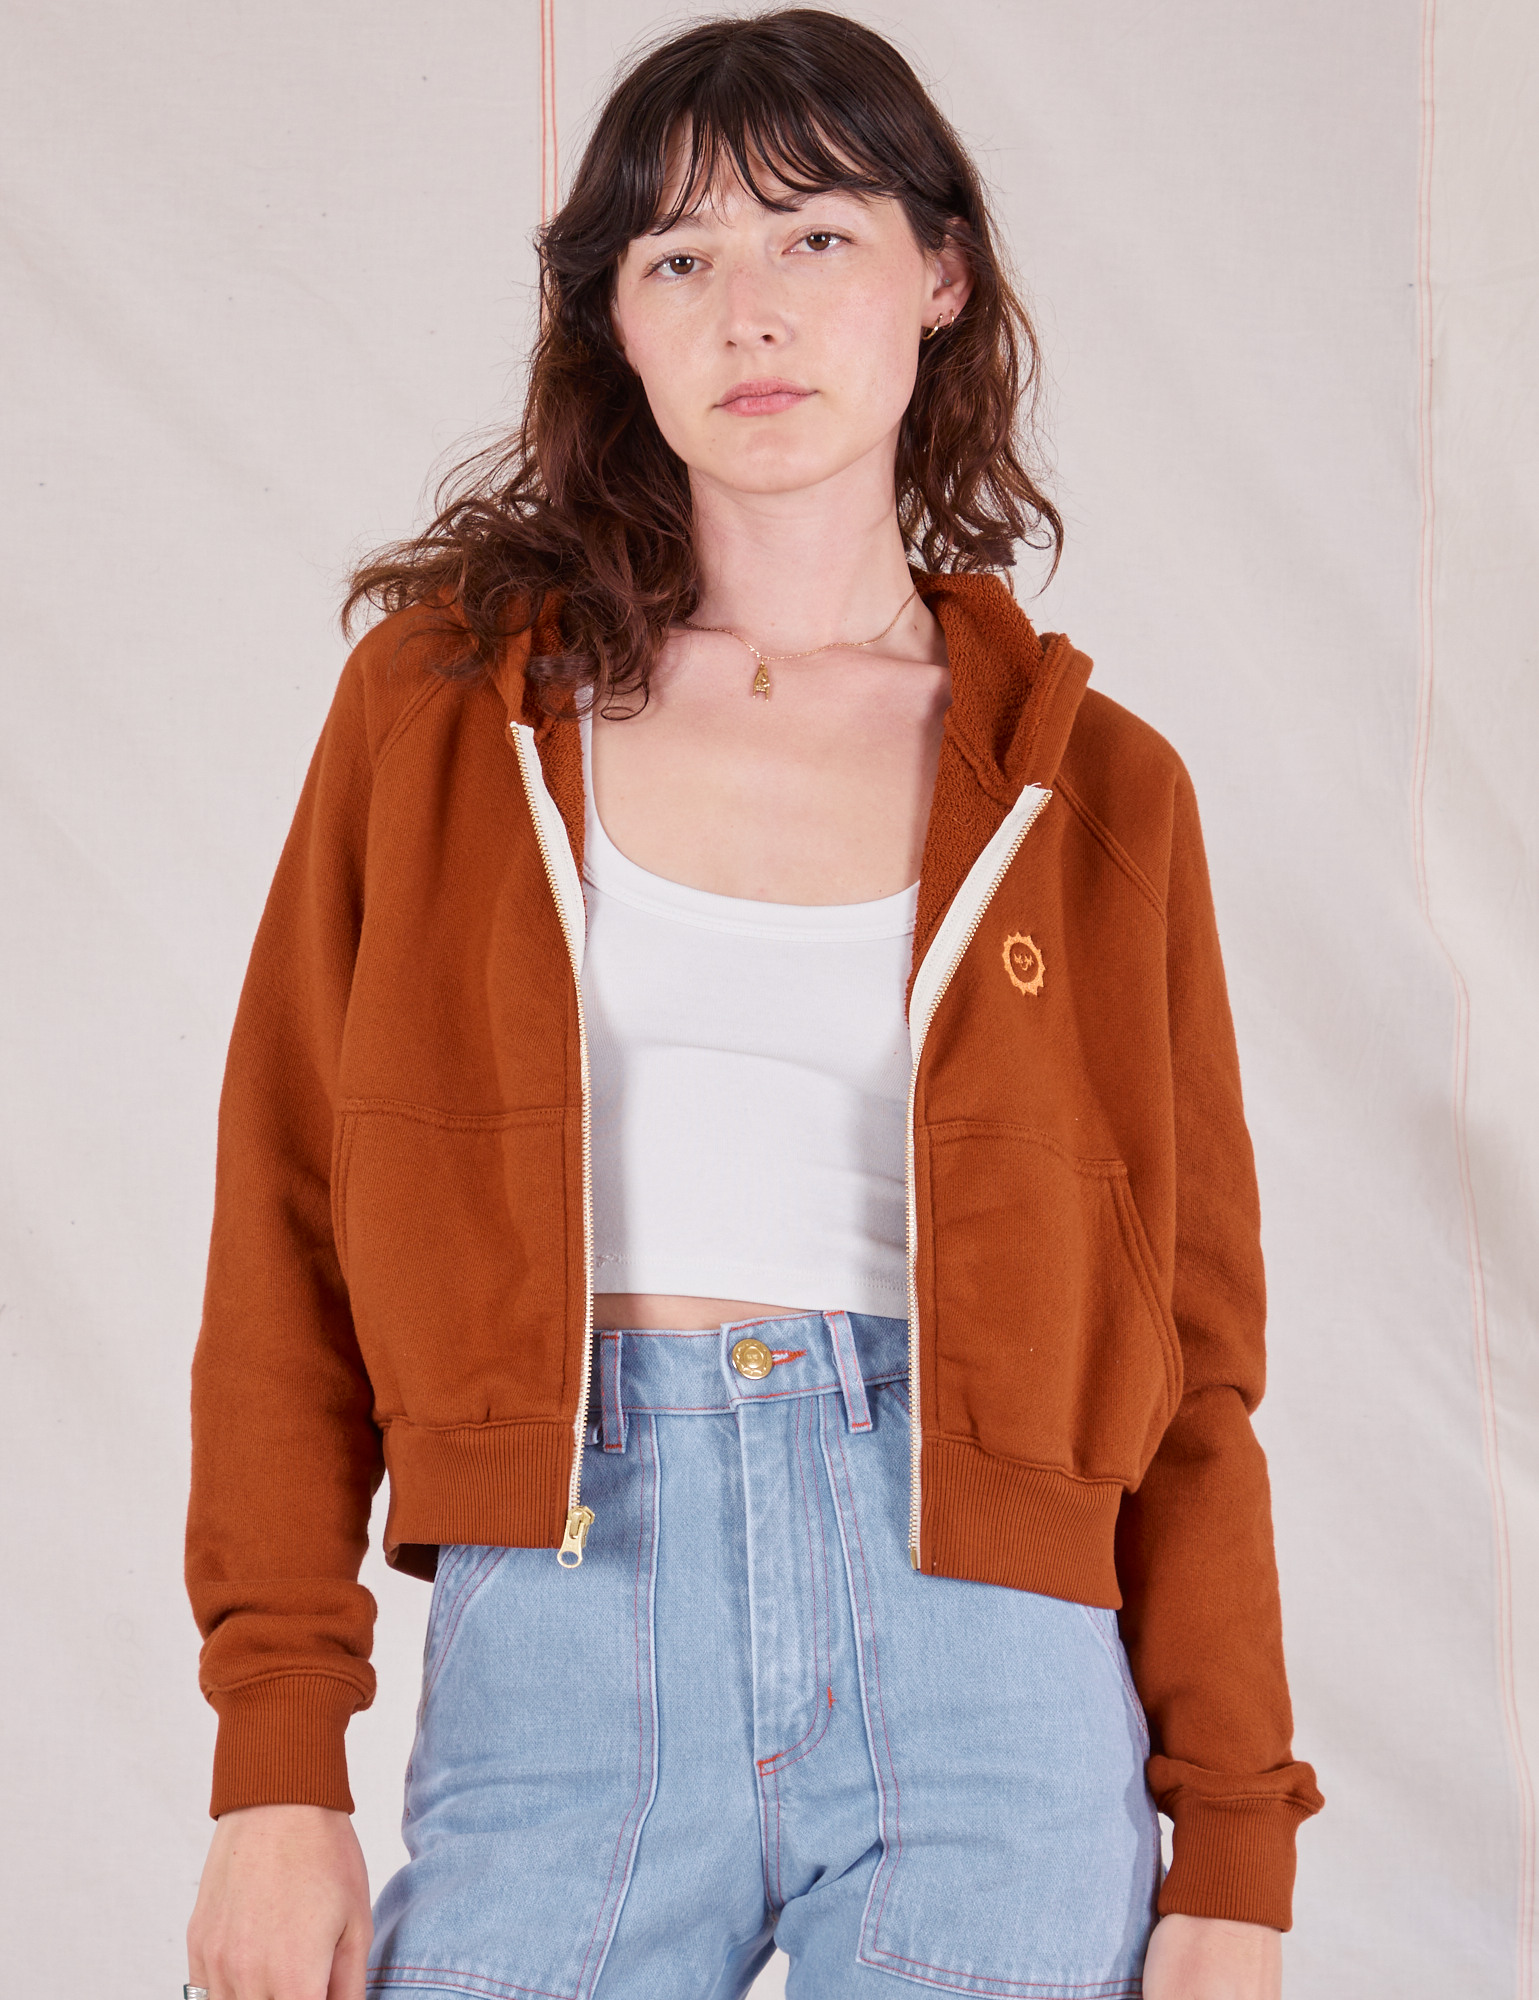 Alex is wearing Cropped Zip Hoodie in Burnt Terracotta, a vintage off-white Cropped tank and light wash Carpenter Jeans